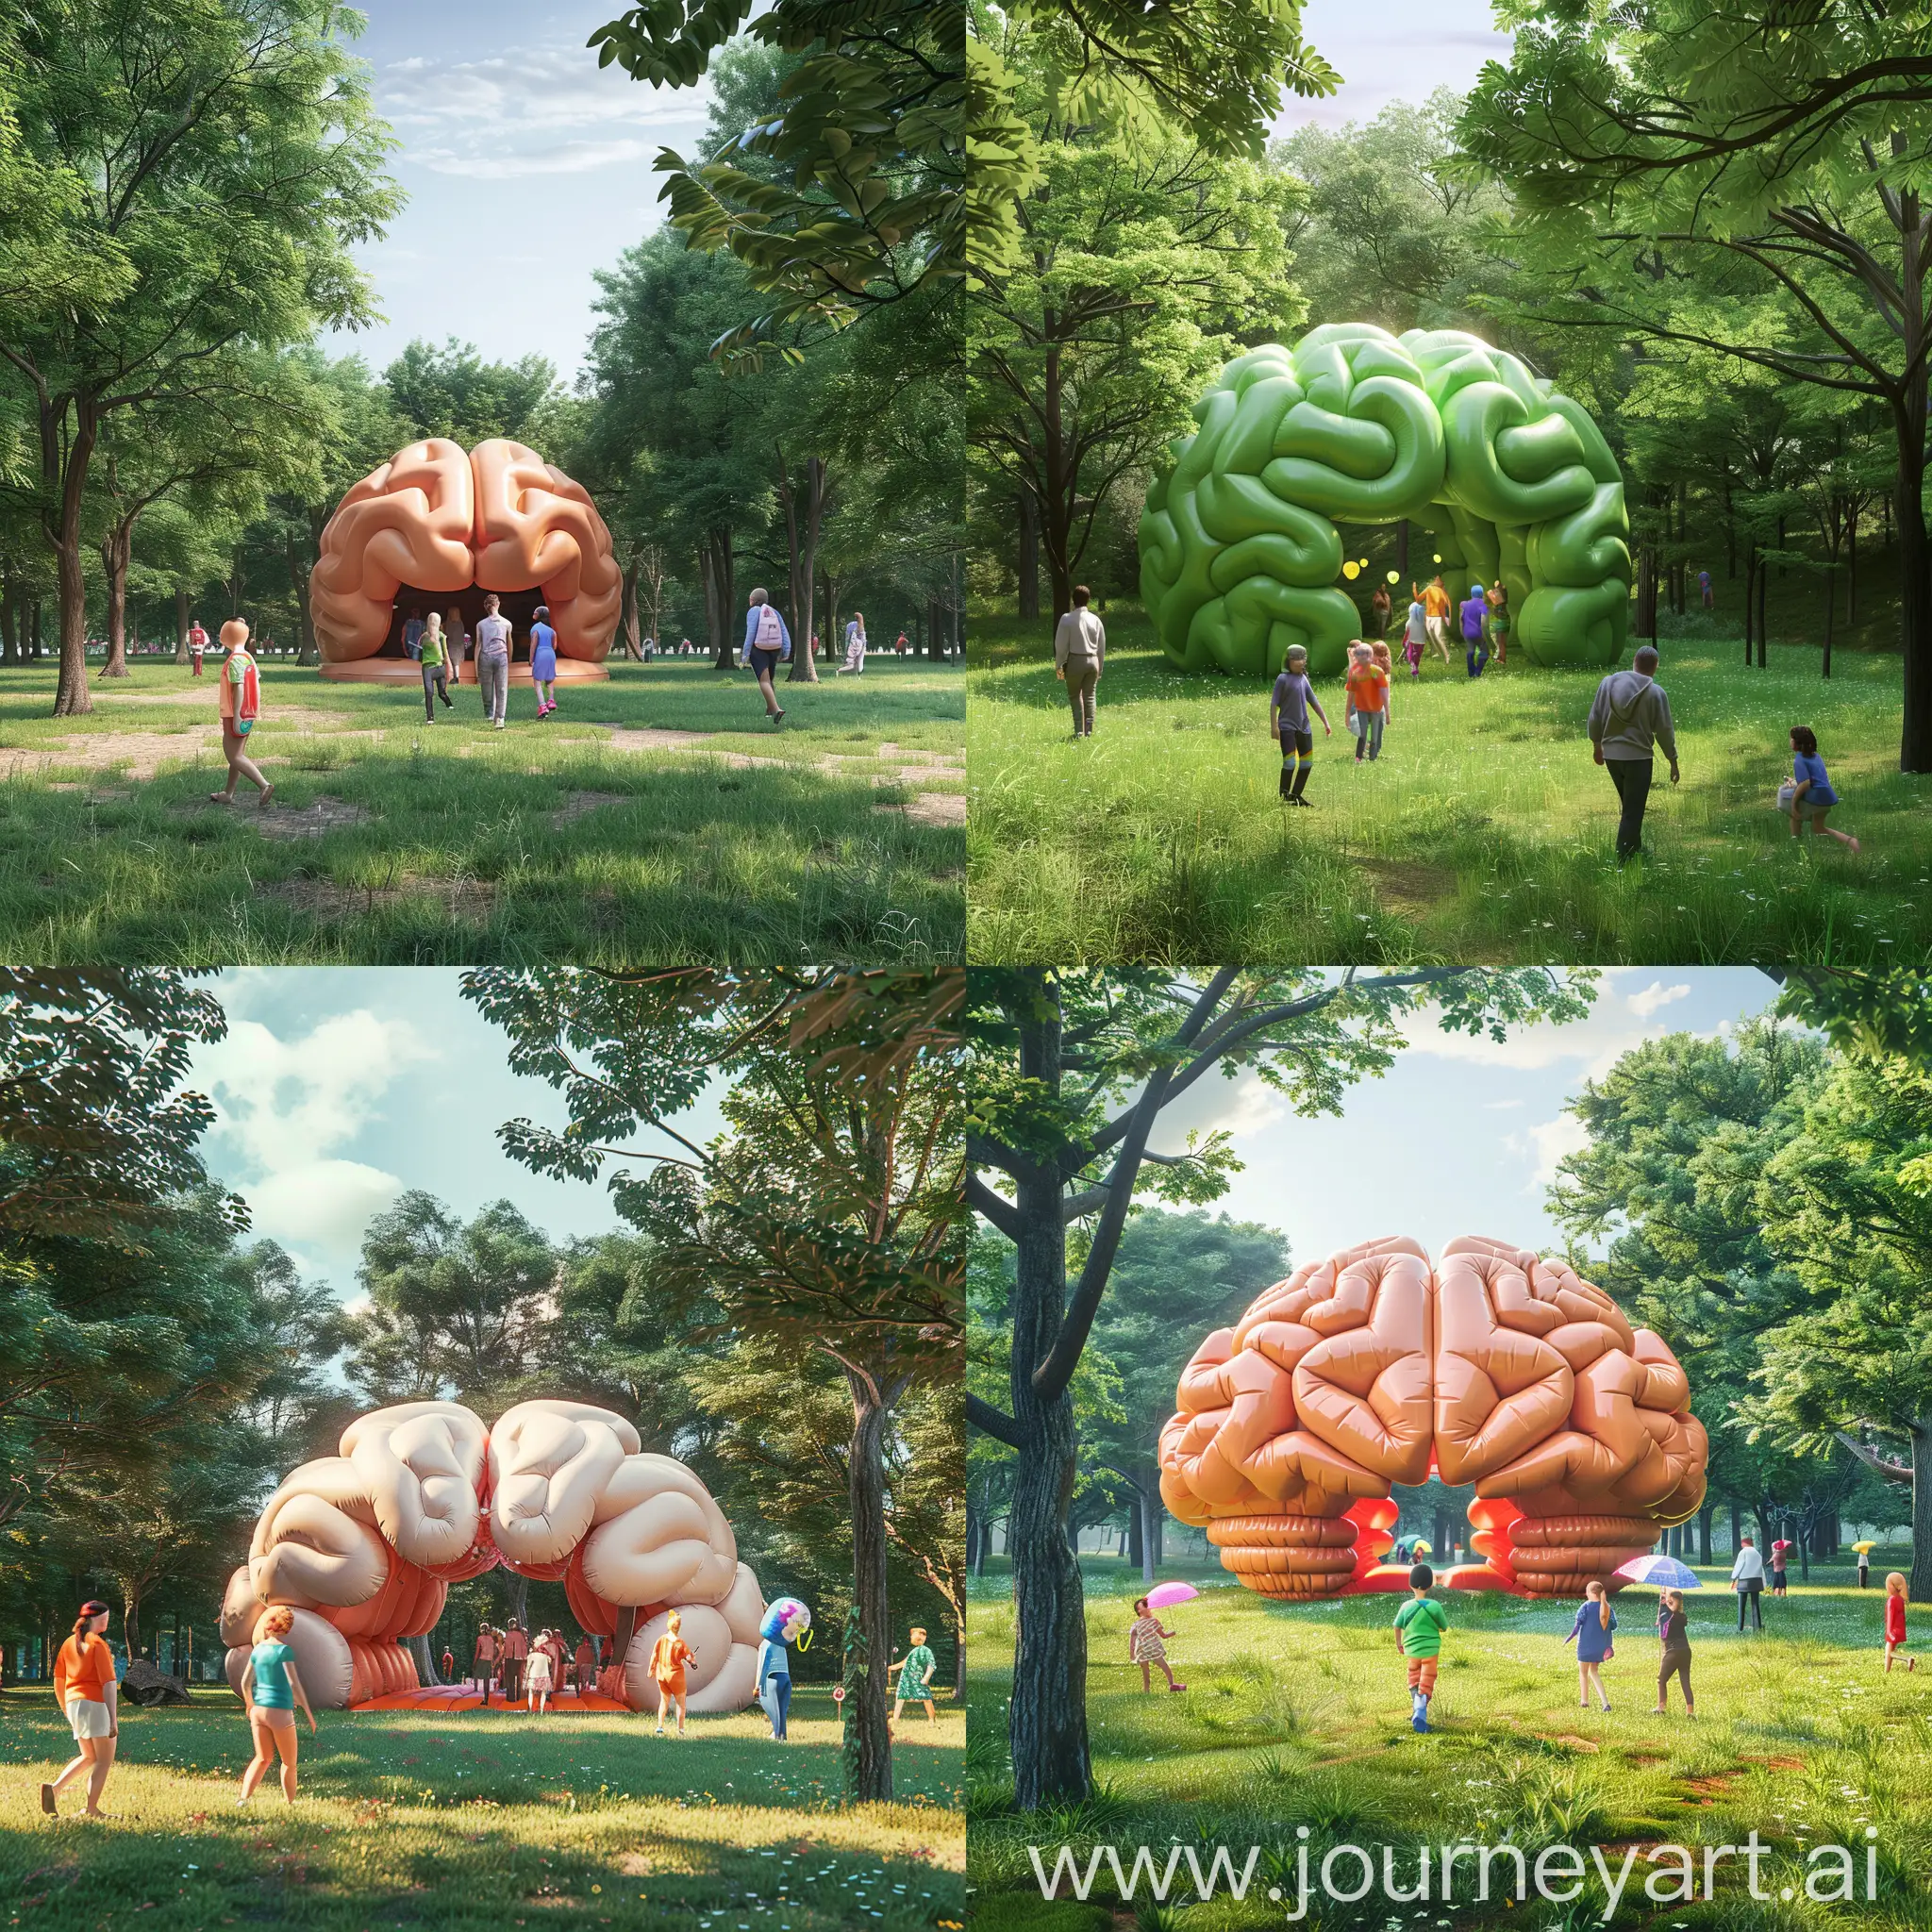 Grass meadow, surrounded by leafy trees. Central brain shaped inflatable structure with entrance for happy colourful people walking in and out